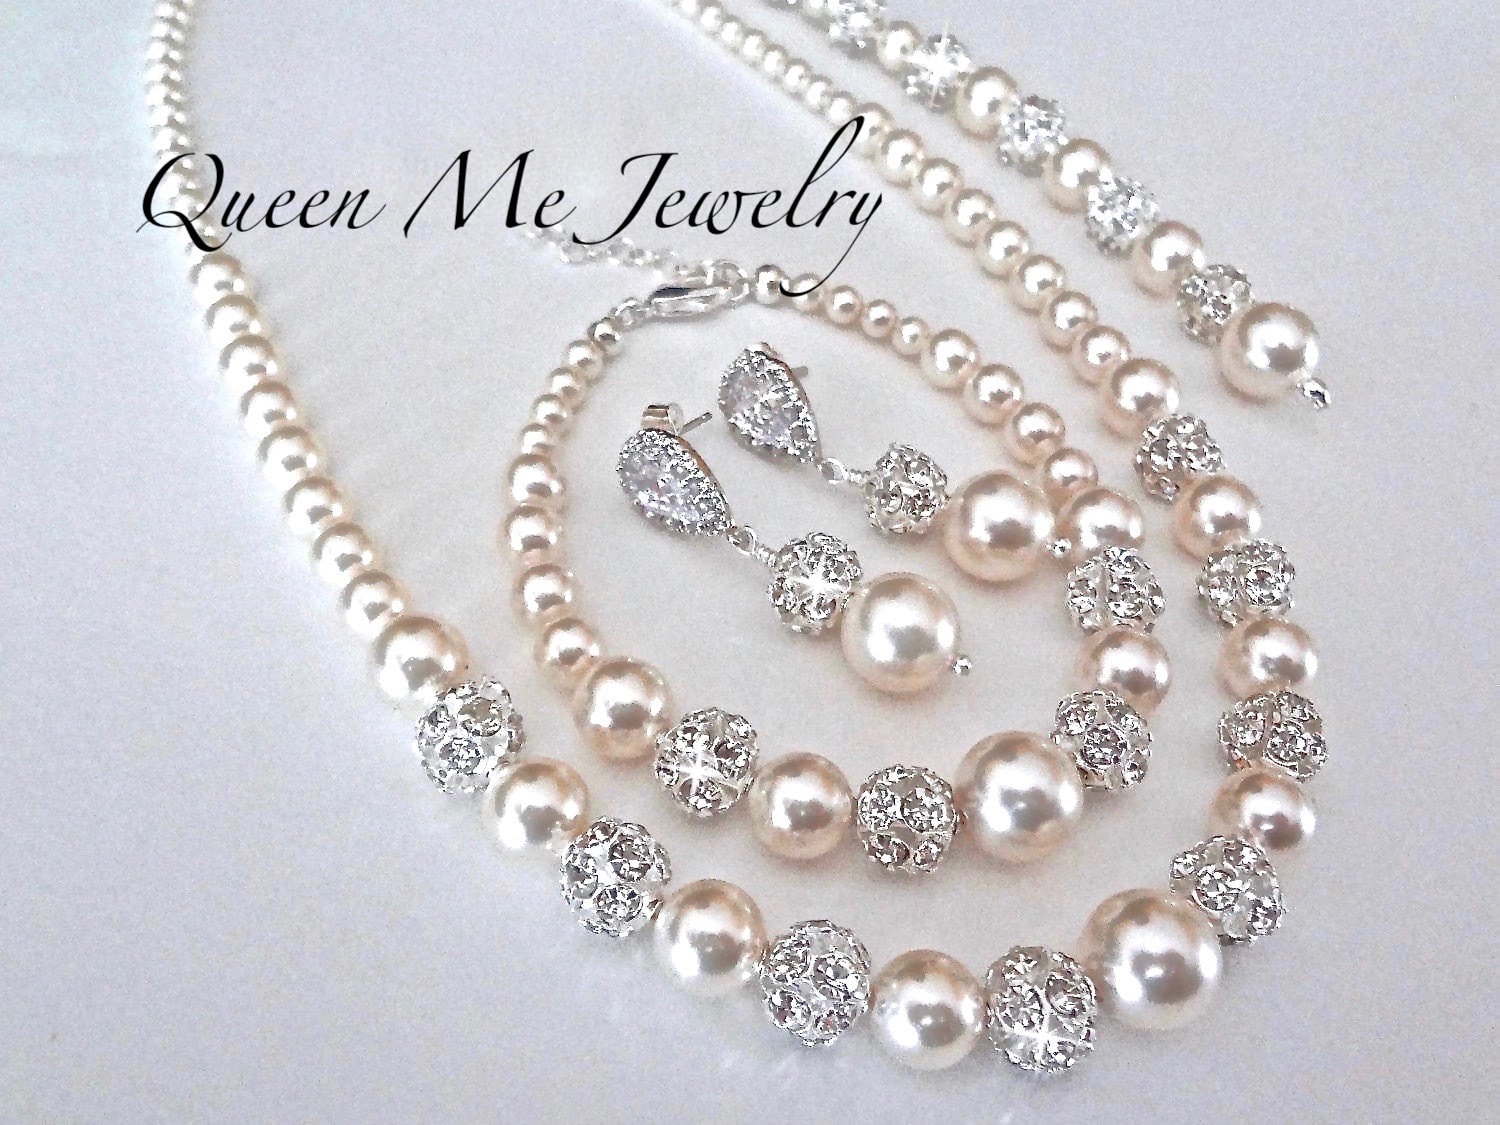 Mother of the Bride Bridesmaids Gift DESTINY Wedding Bridal Jewelry For a Bride Pearl Jewelry SET Trouwen Sieraden Sieradensets Necklace Earrings AND Bracelet 